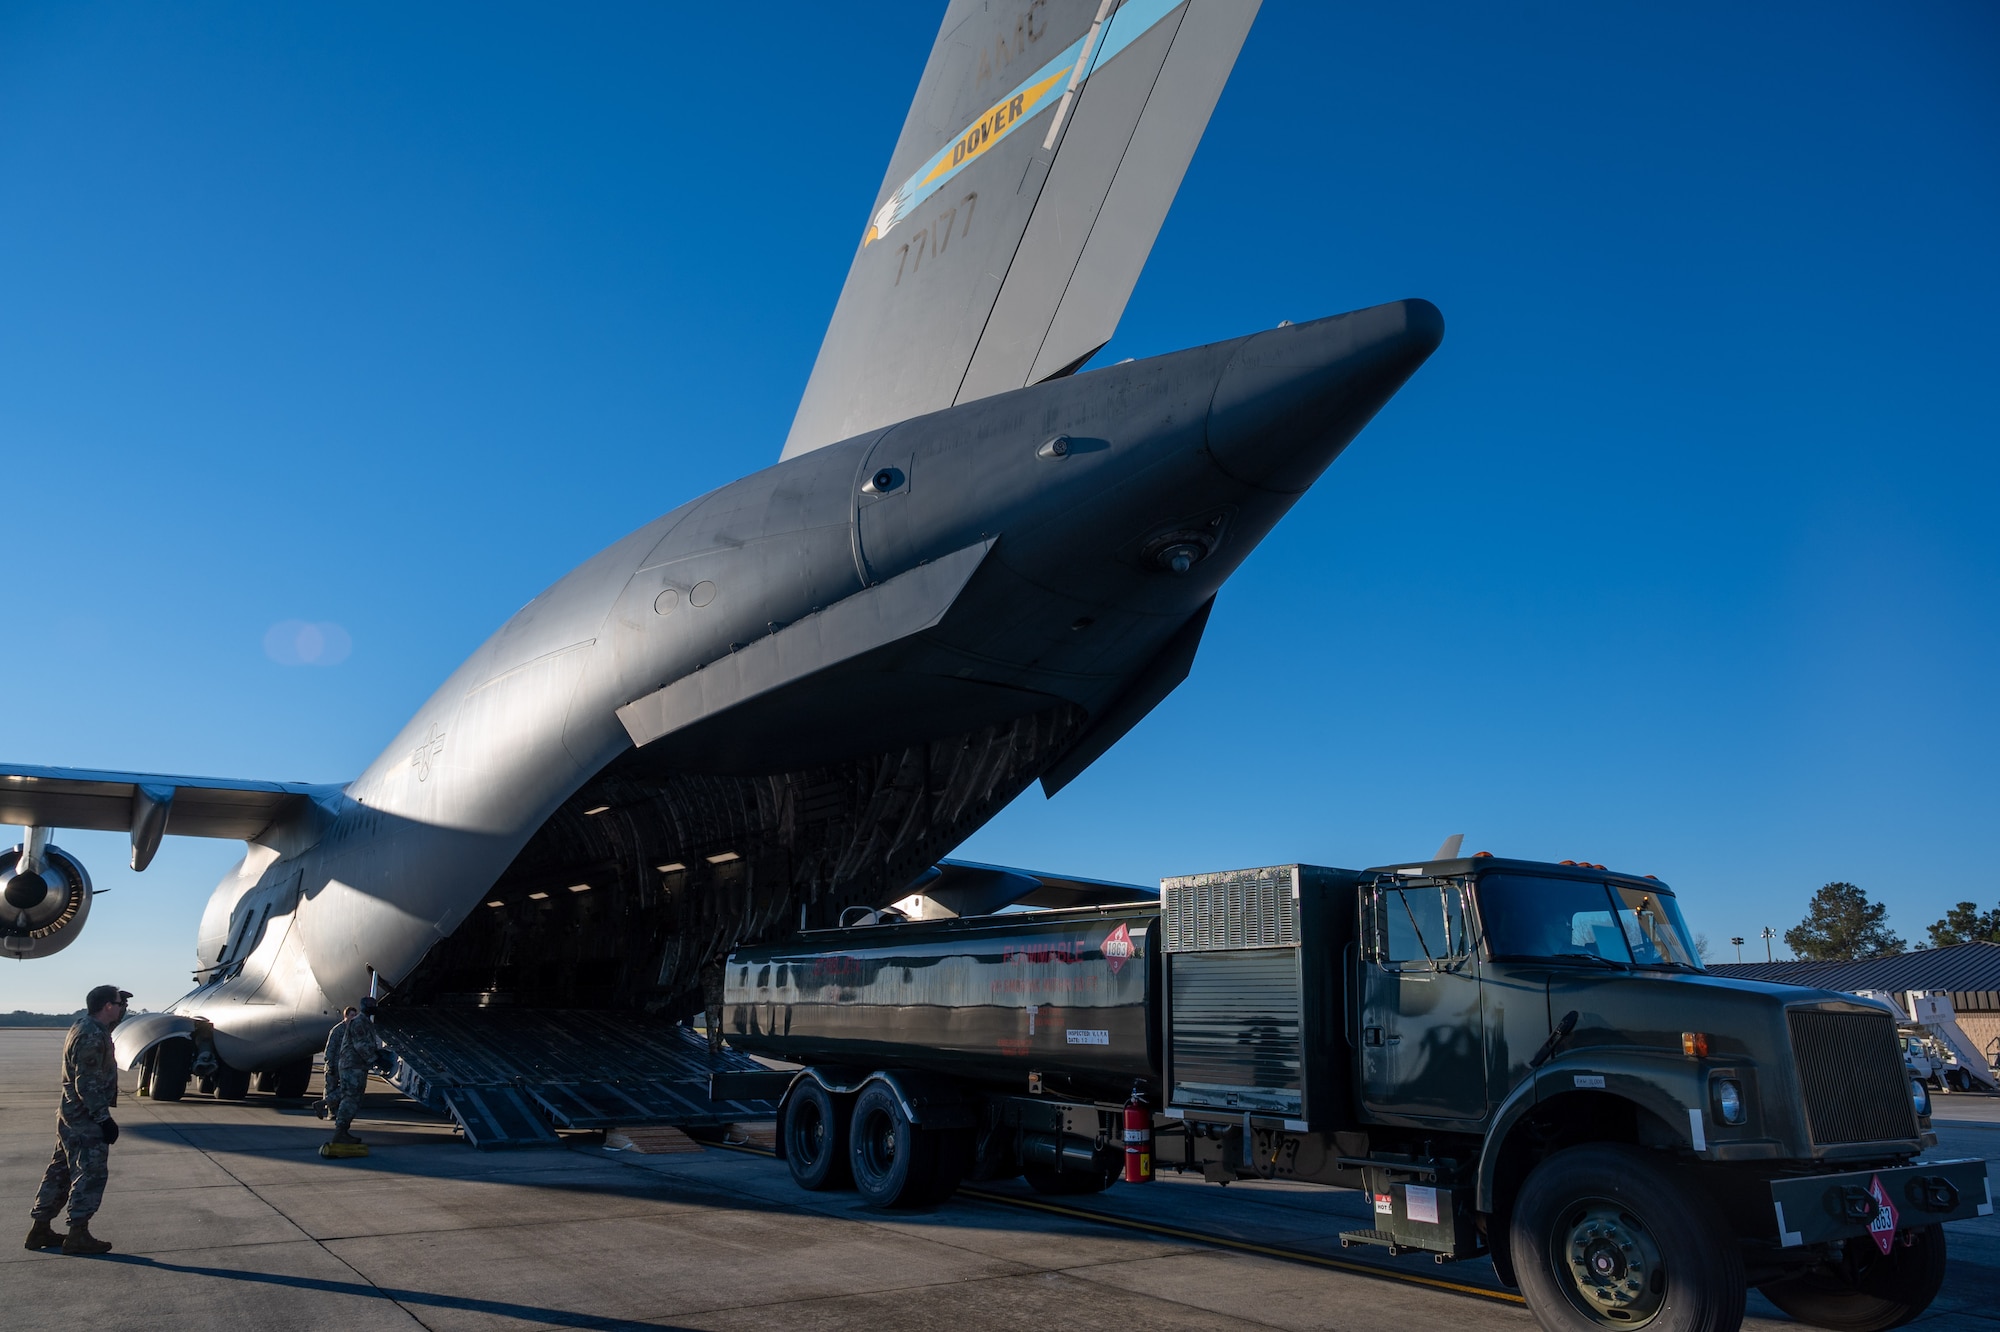 A fuel truck is loaded onto a Dover Air Force Base C-17 Globemaster III during Exercise Mosaic Tiger at Moody AFB, Georgia, Feb. 23, 2021. Mobility Airmen from Dover AFB and Joint Base McGuire-Dix-Lakehurst, New Jersey, participated in the exercise to enhance readiness and reinforce Air Mobility Command support to the joint warfighter. (U.S. Air Force photo by Airman 1st Class Faith Schaefer)